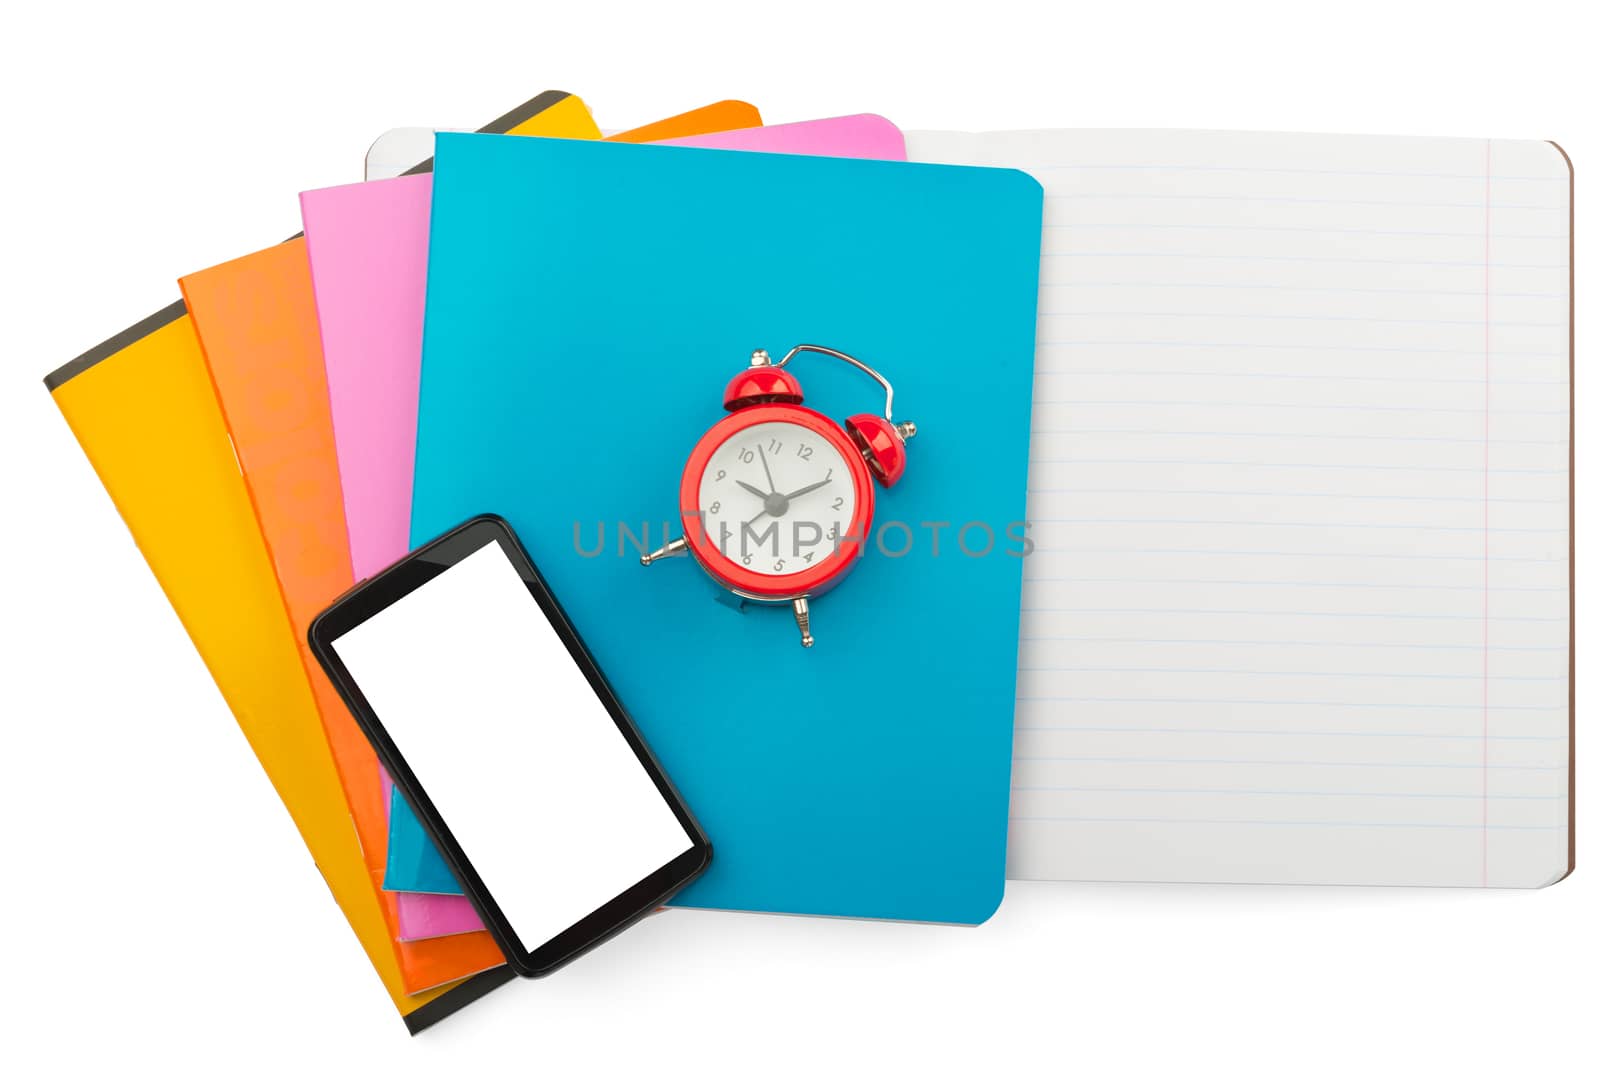 Notebooks and alarm clock by cherezoff